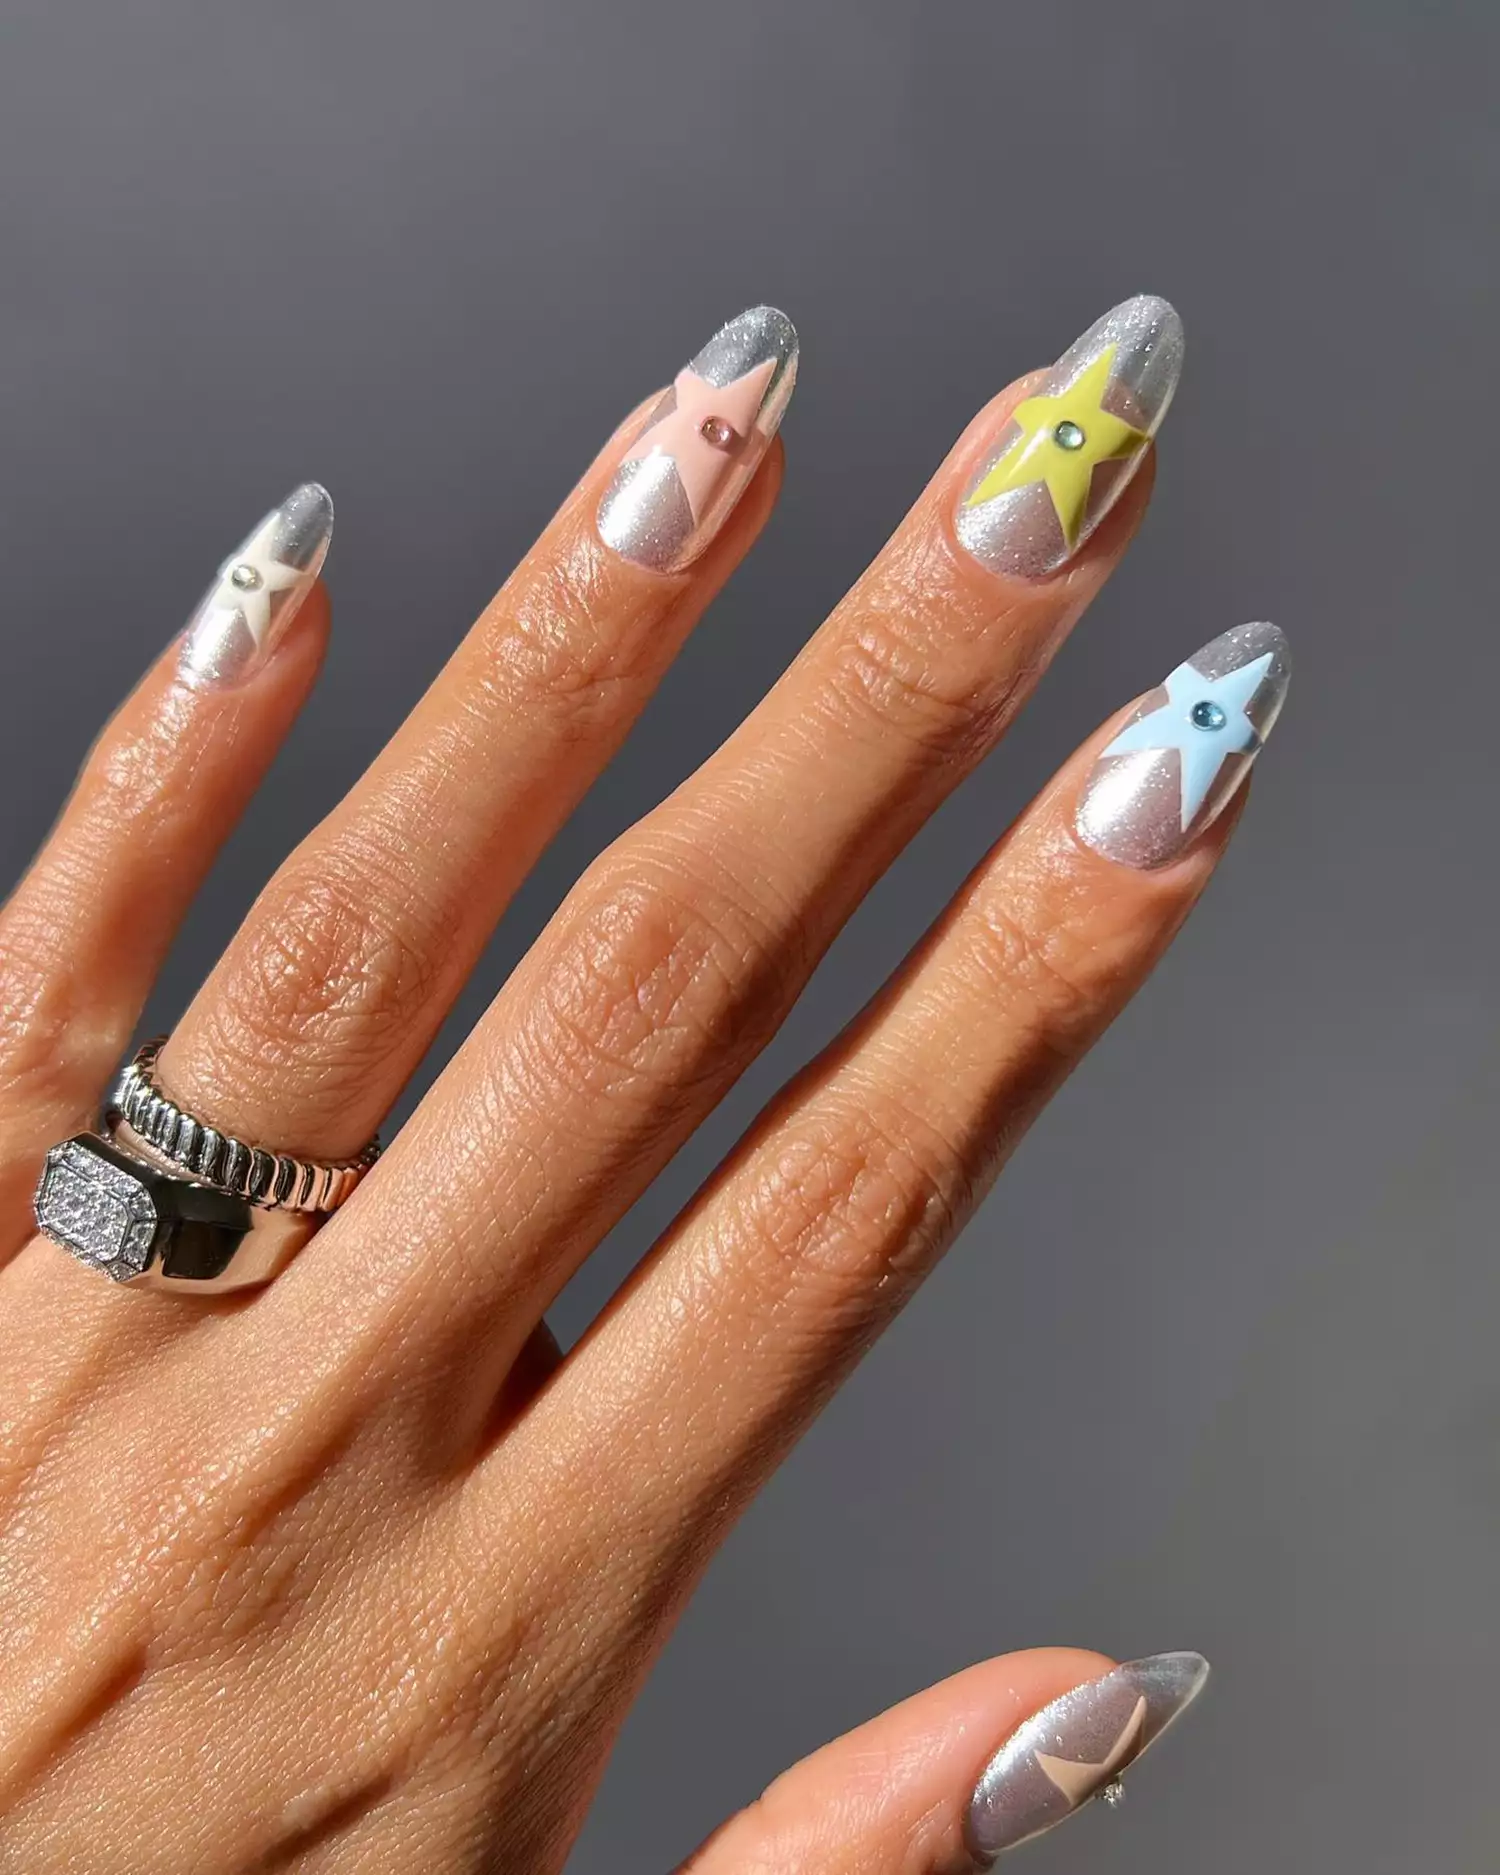 Star nails by @overglowedit.